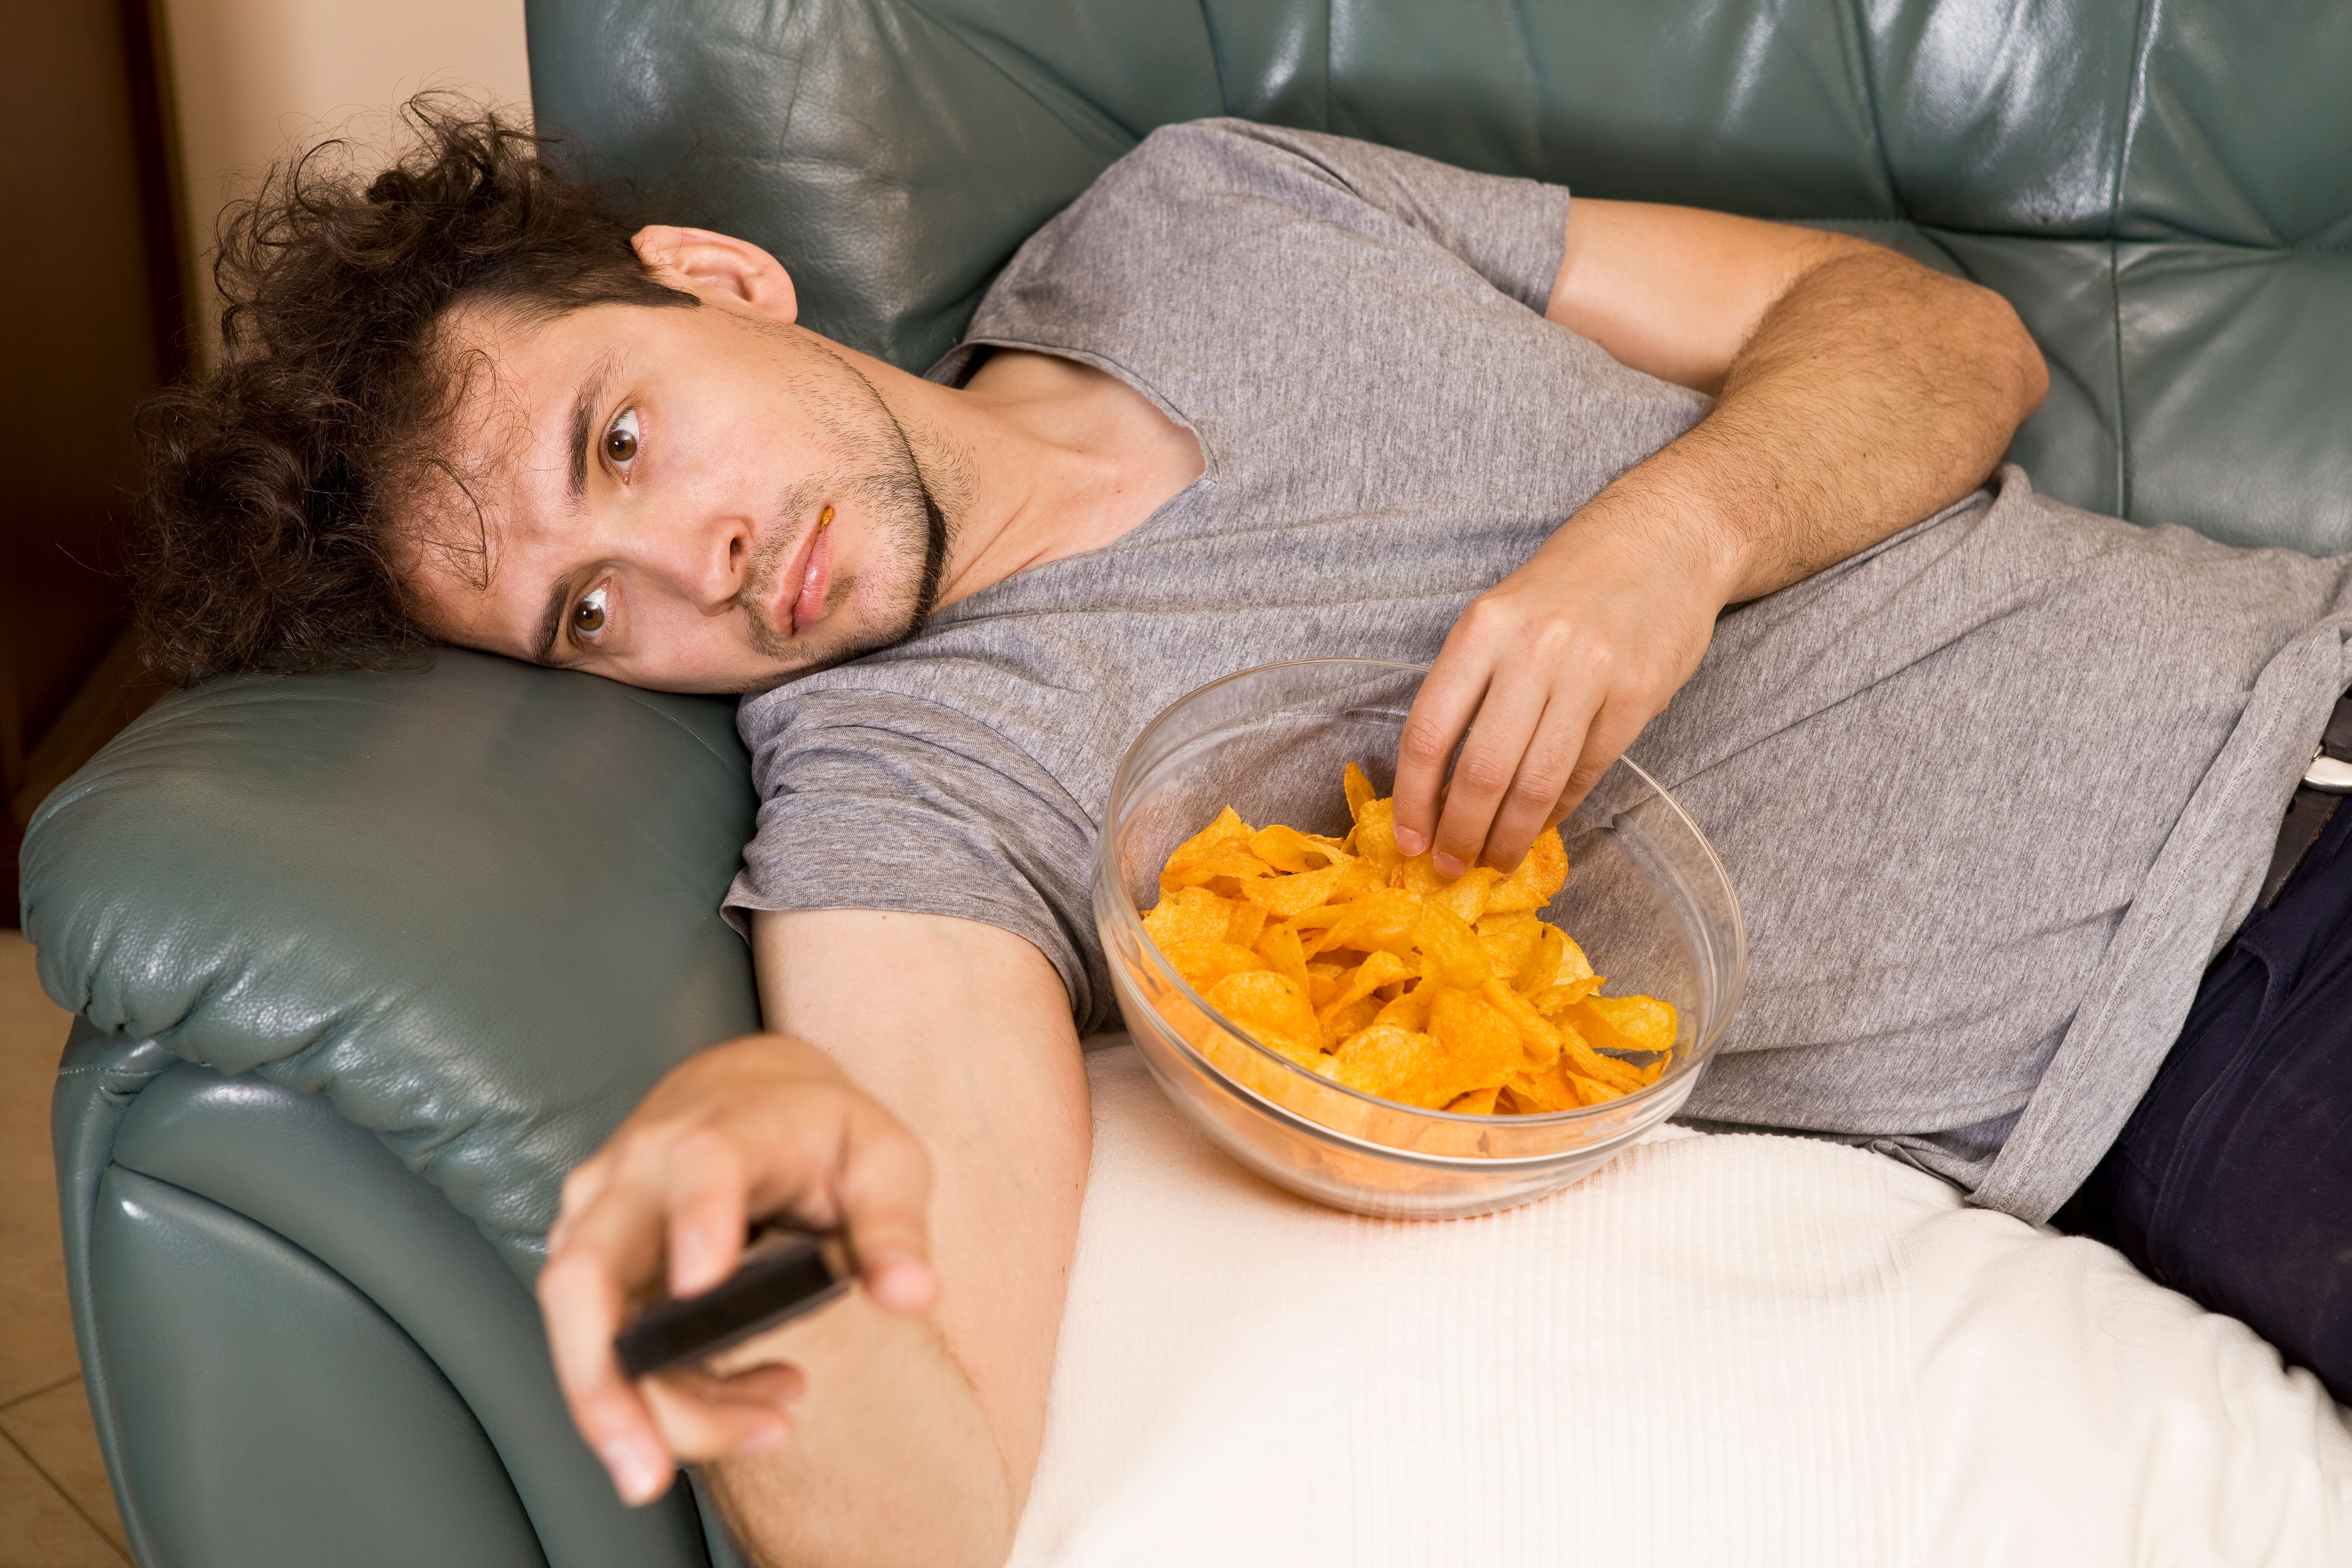 A man eating chips while watching television. | Source: Getty Images